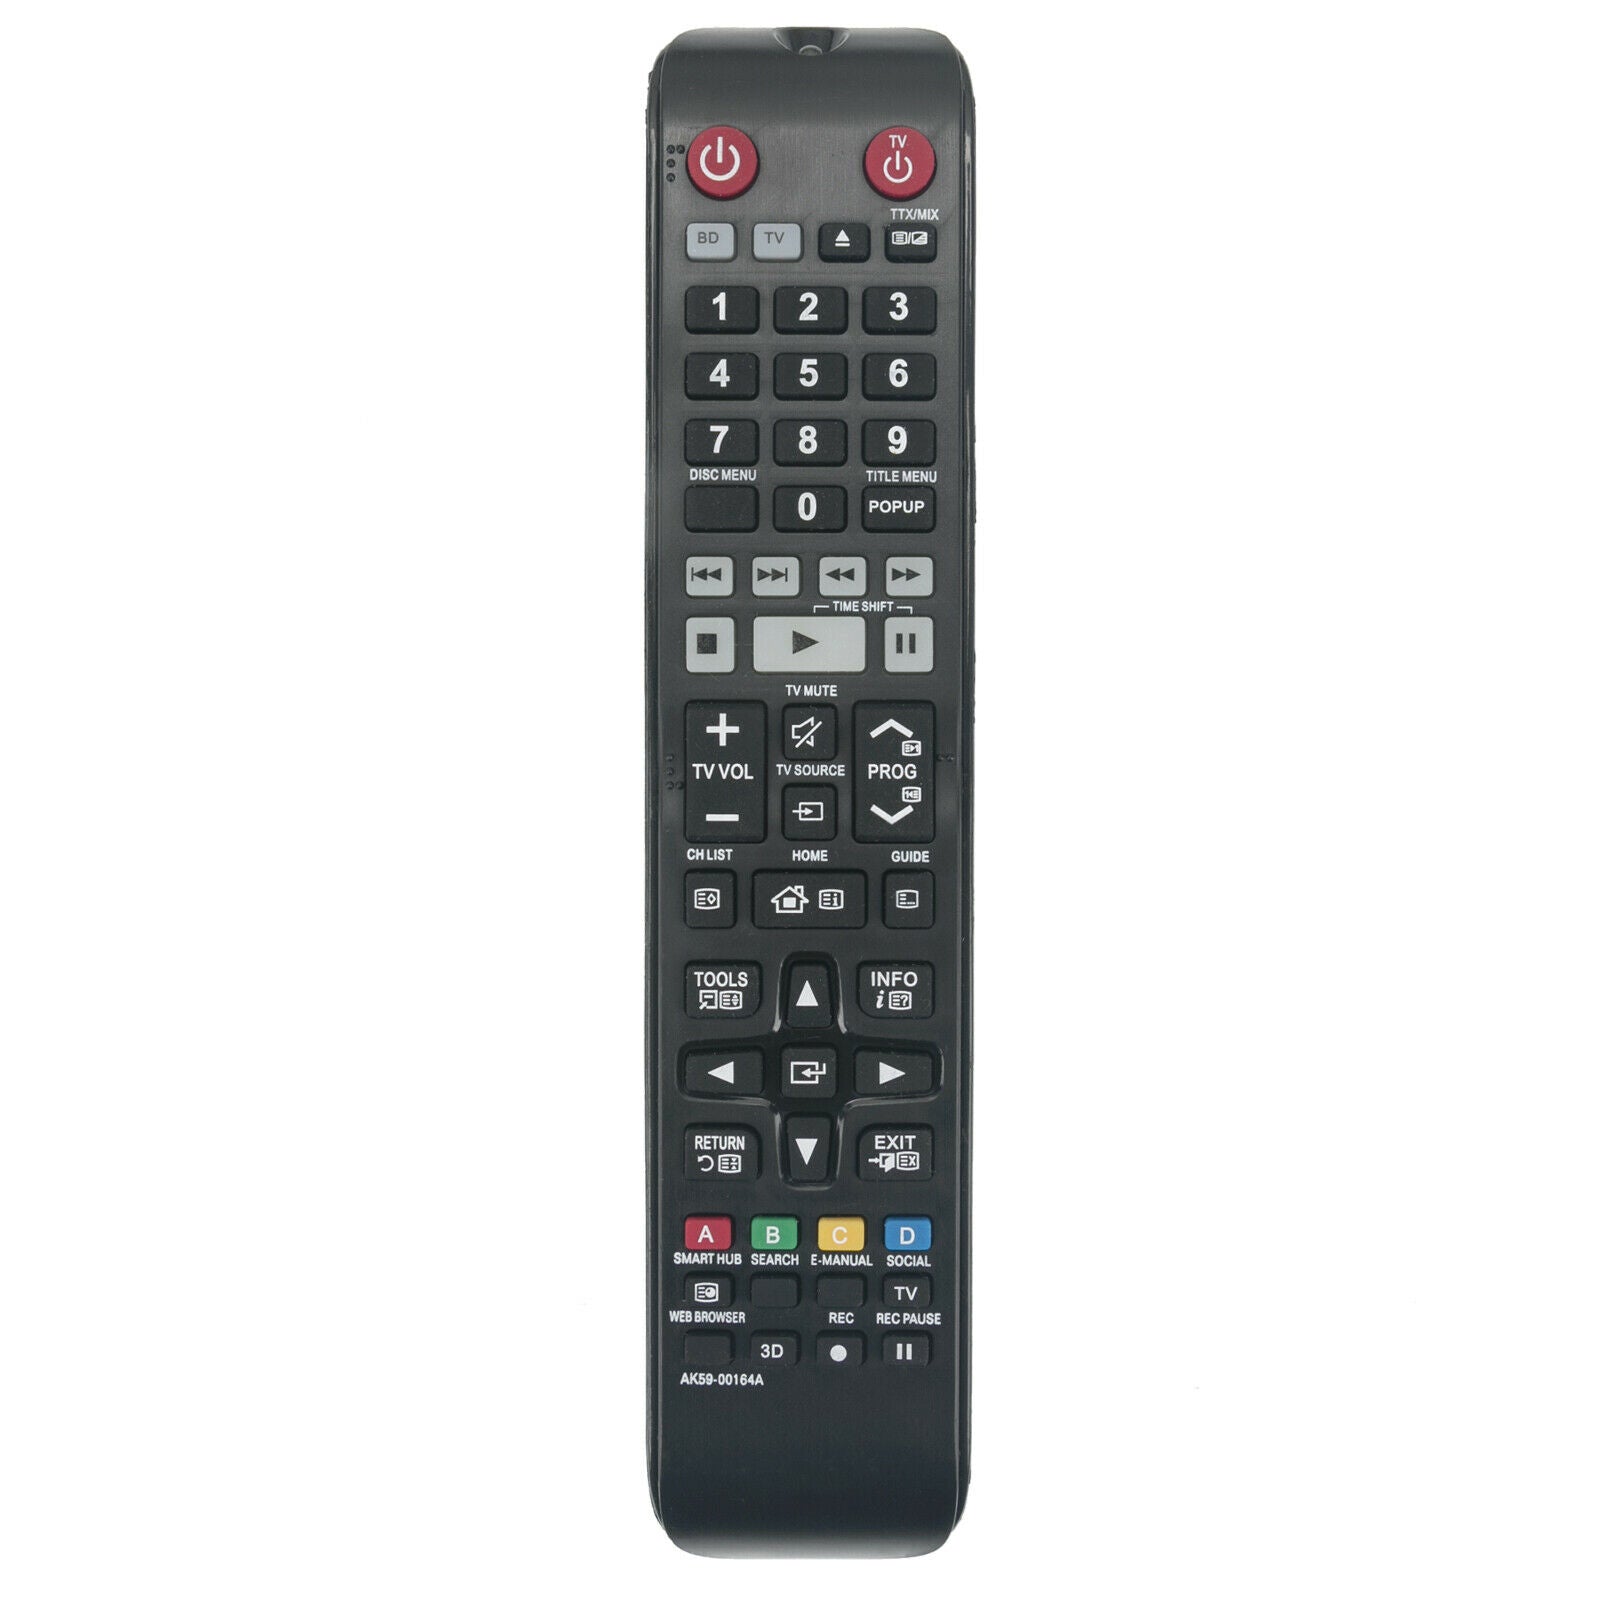 AK59-00164A Replacement Remote Control for Samsung DVD Player BD-D8500M